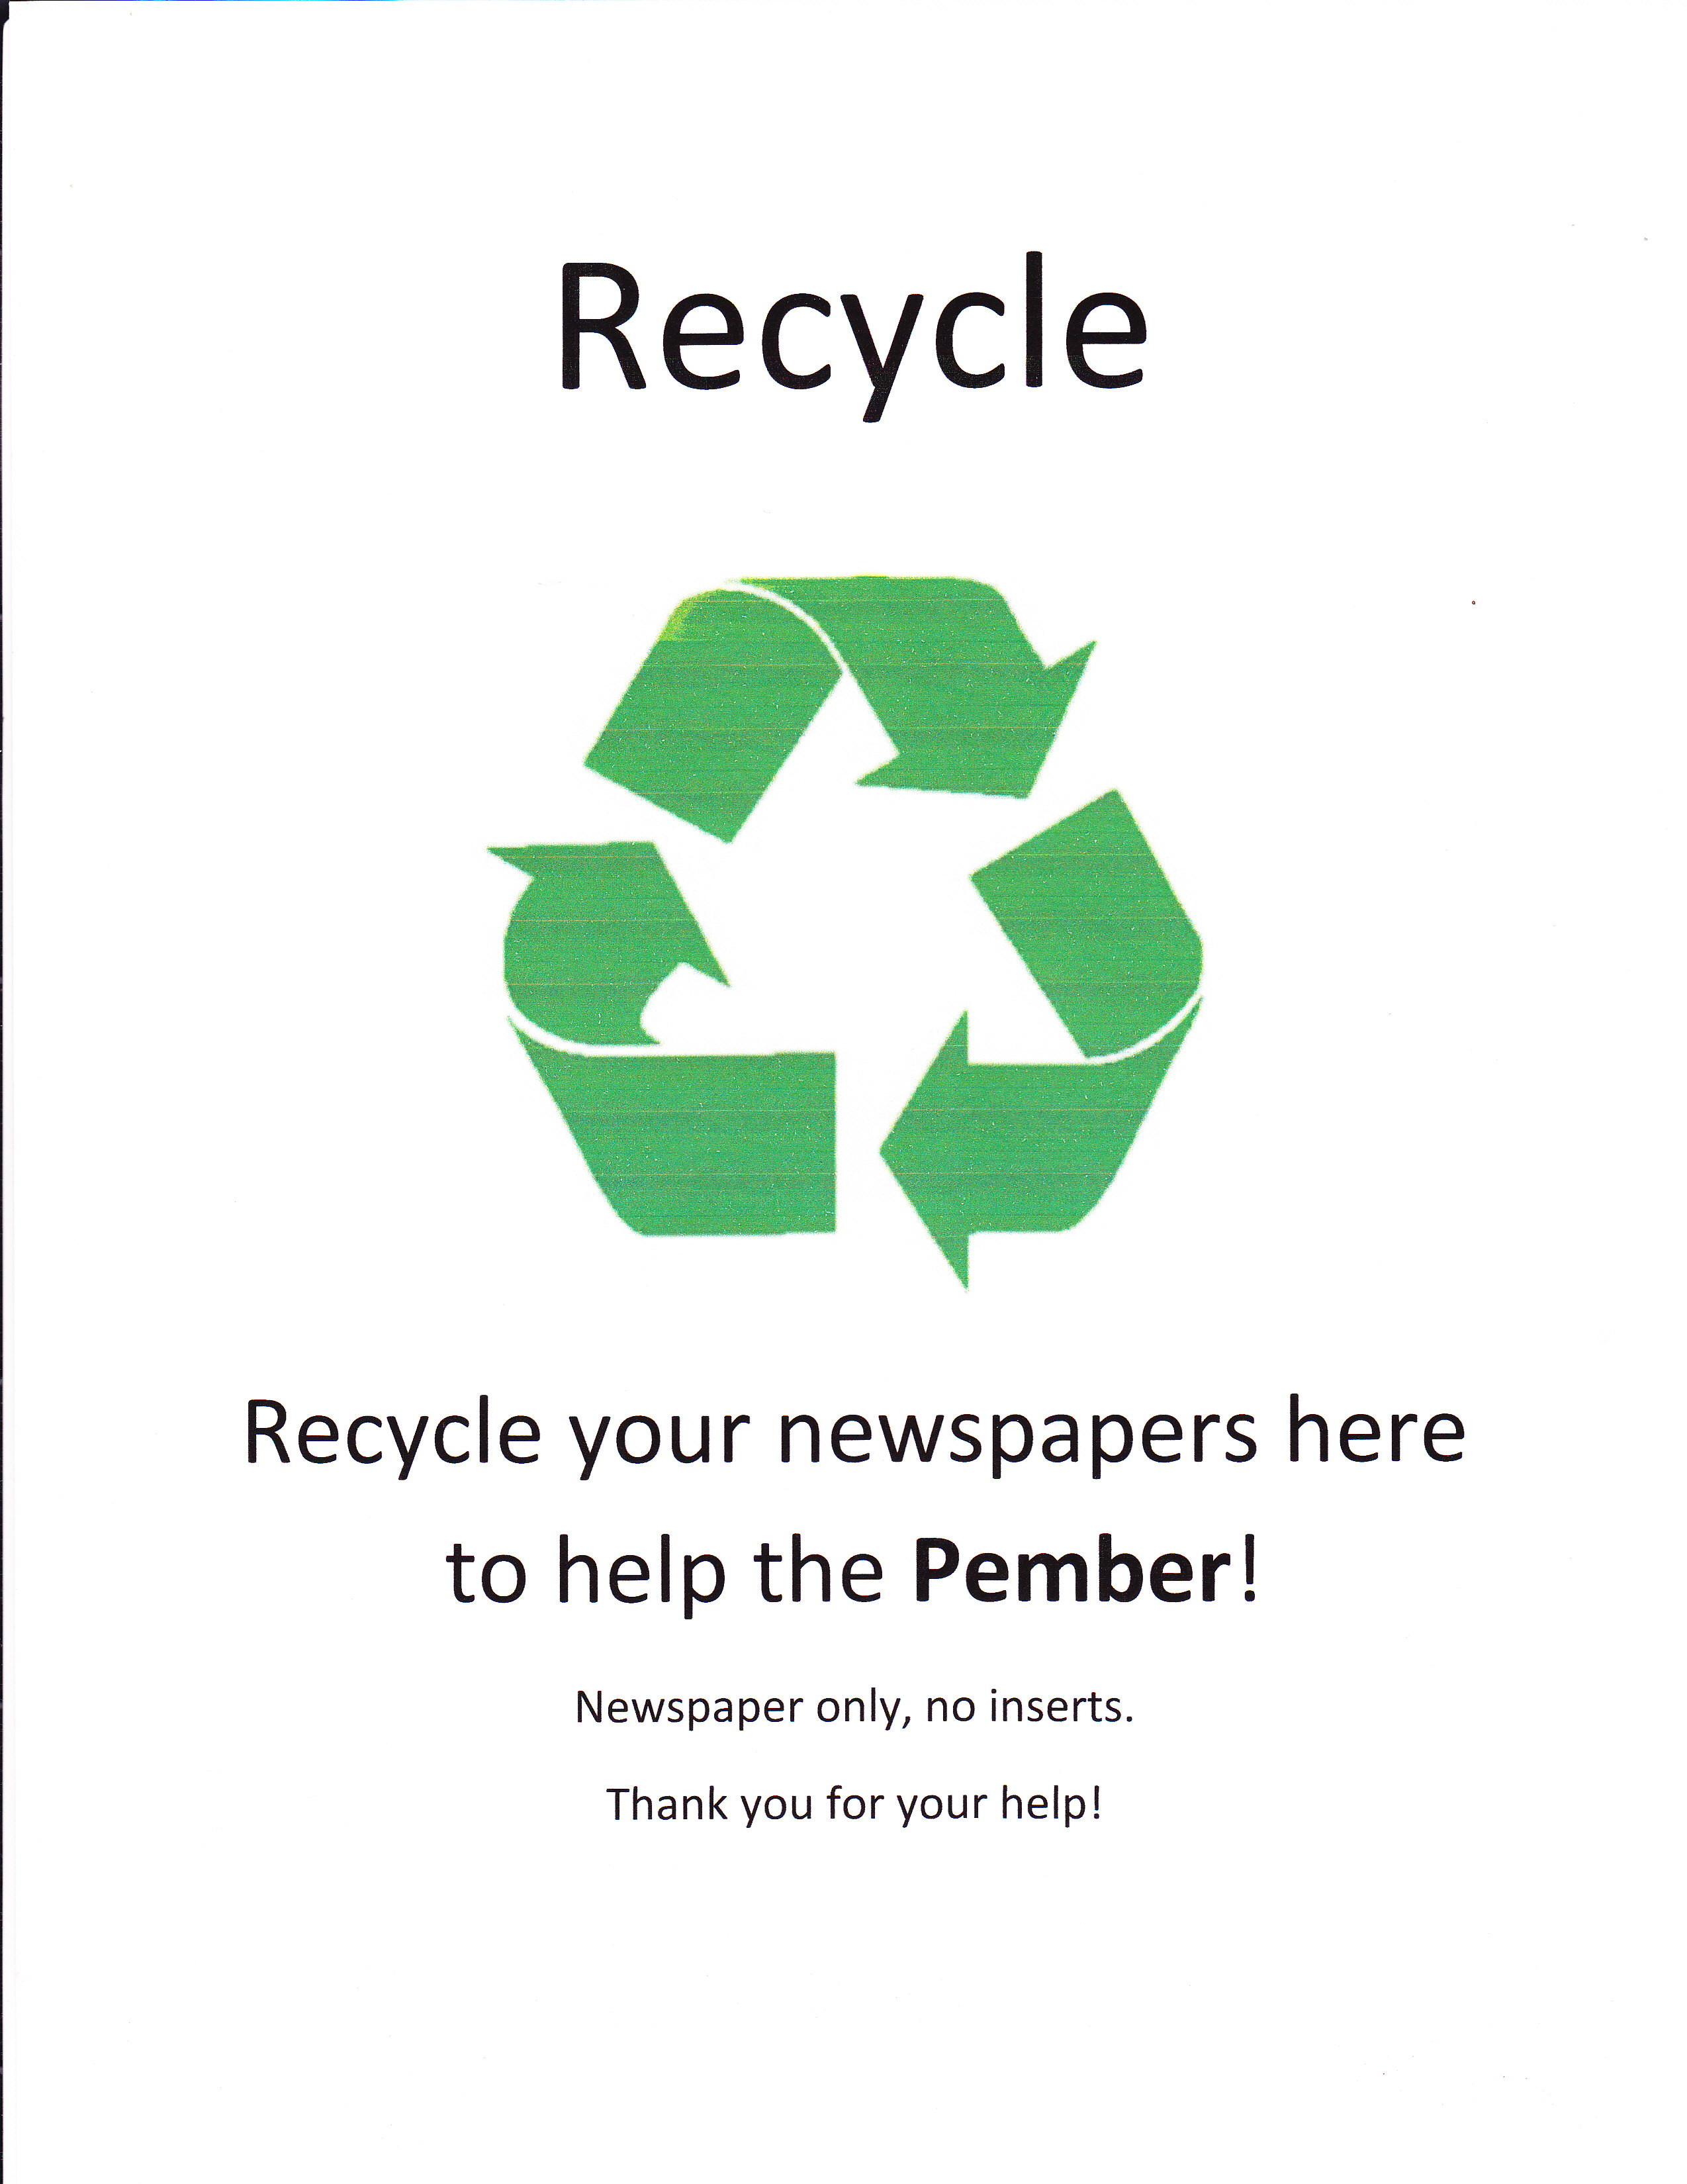 Recycle to support the Pember